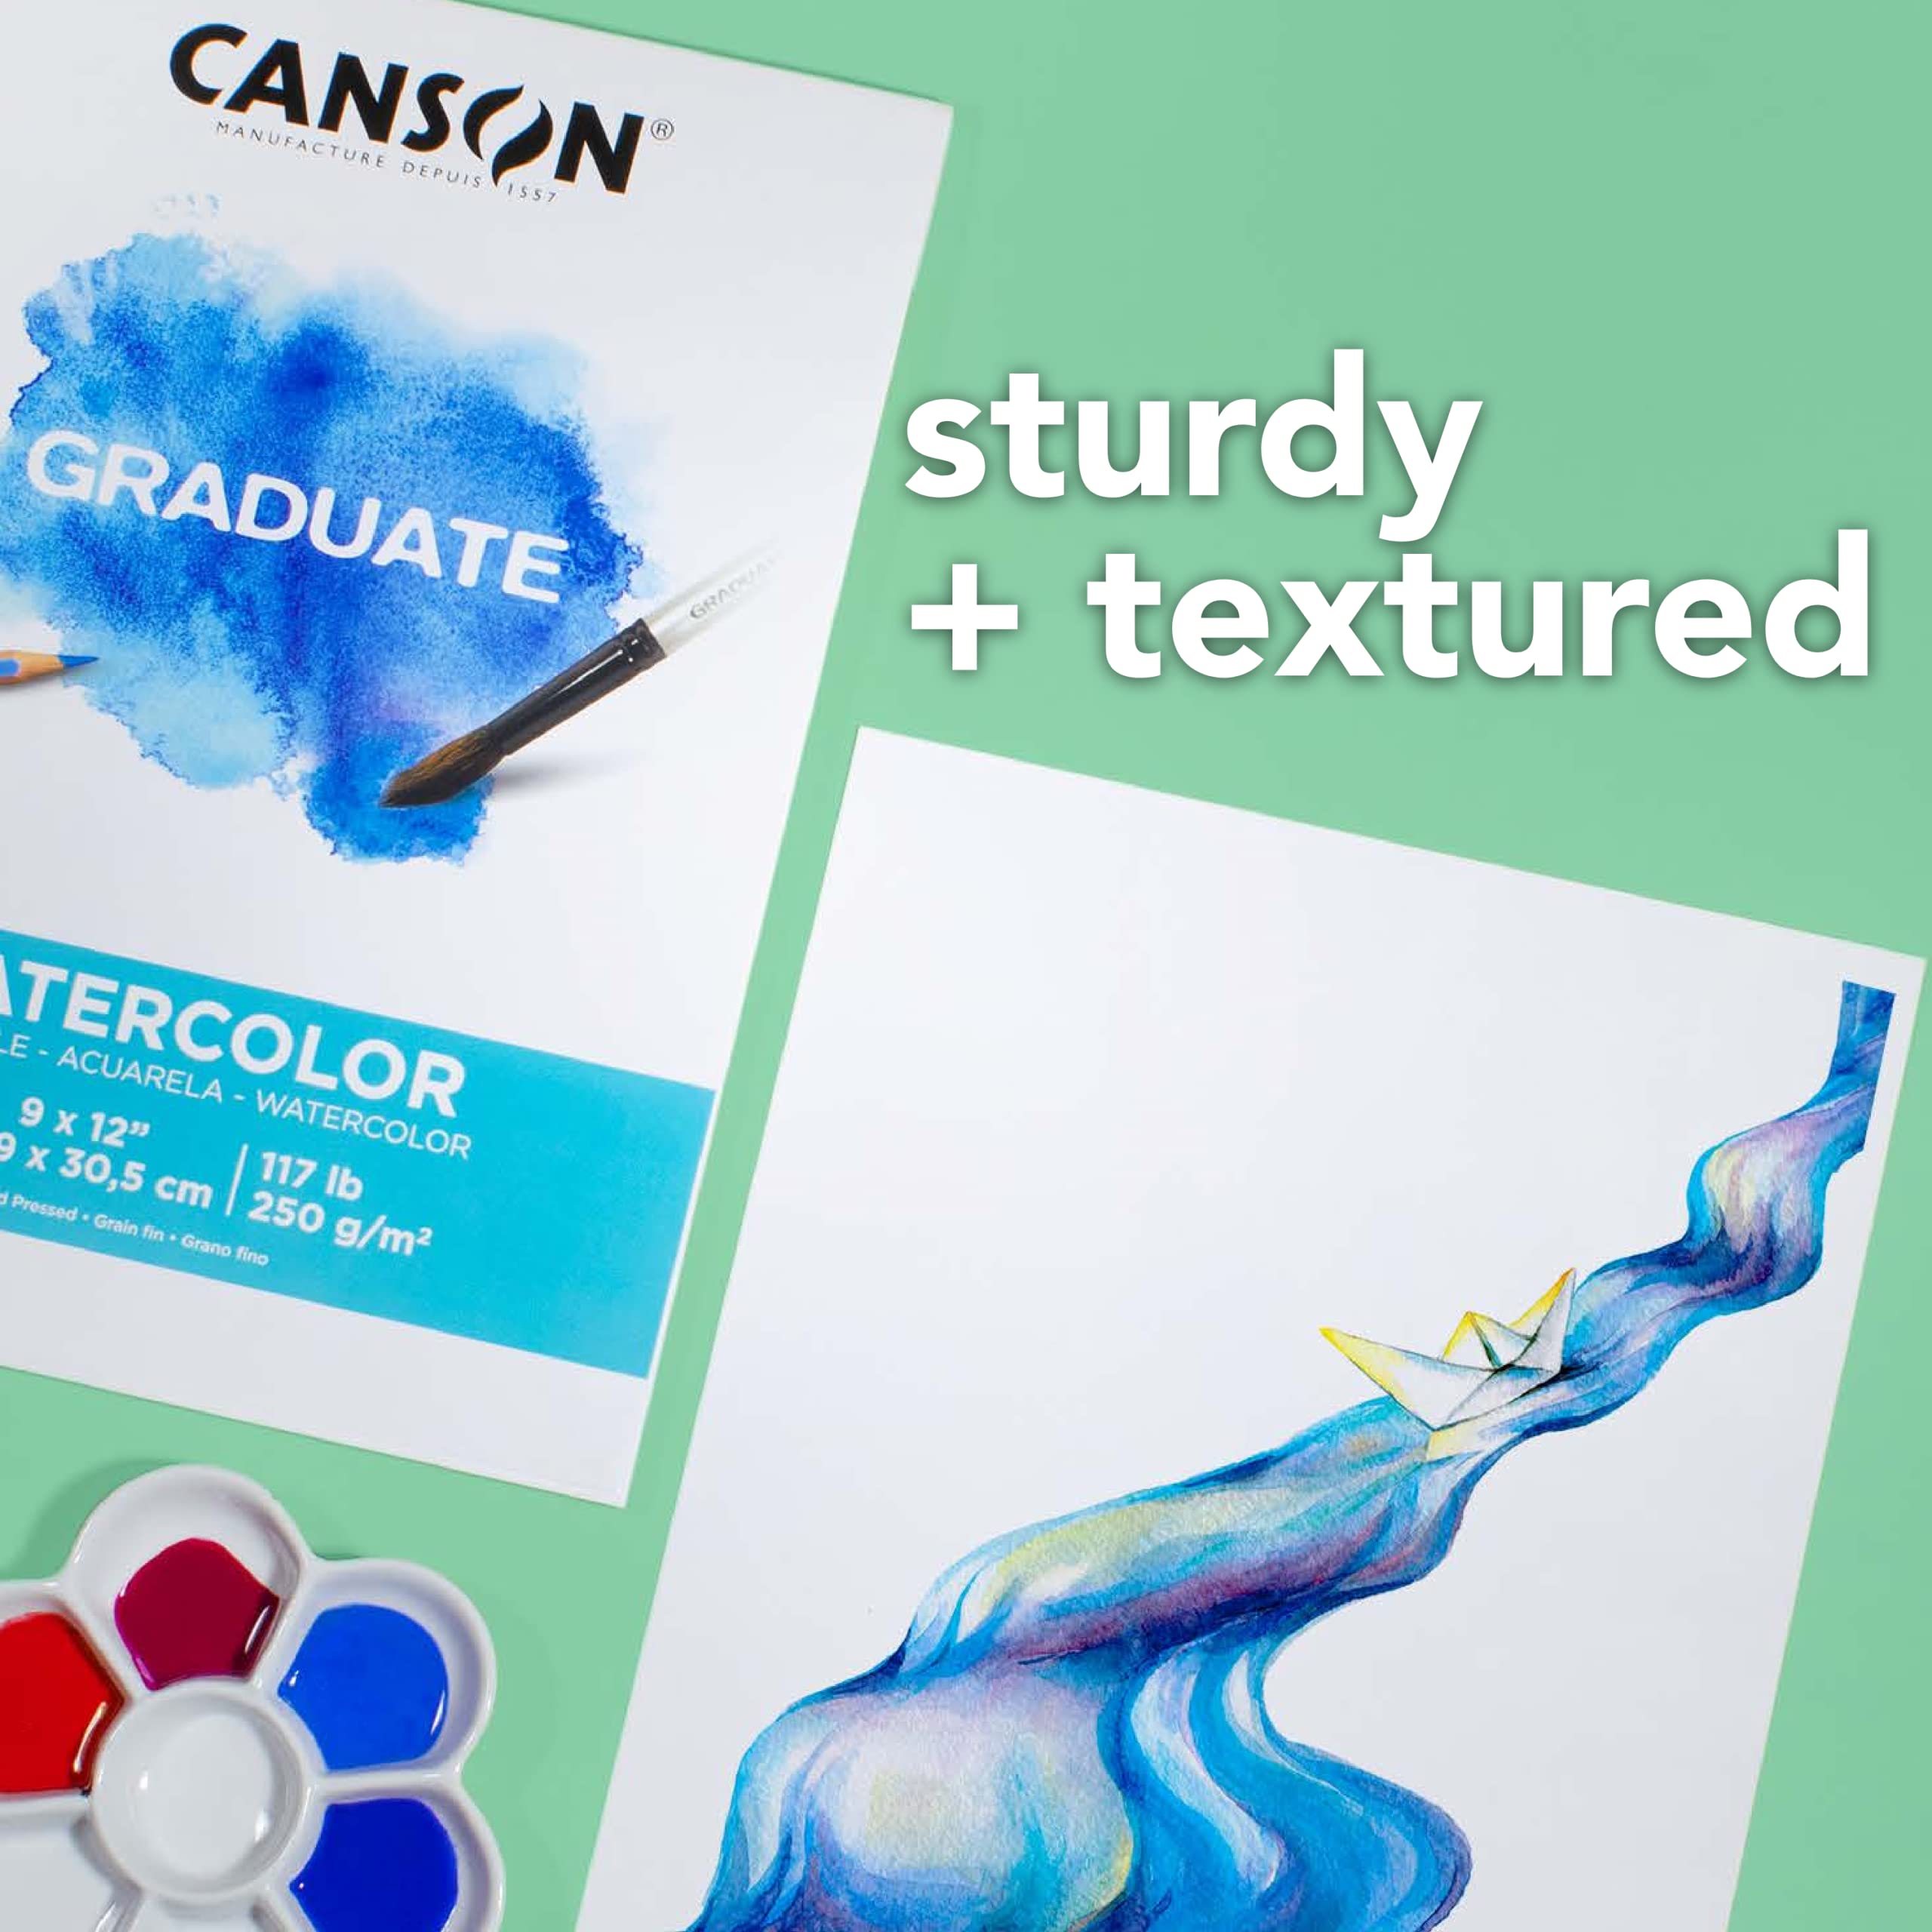 Canson Graduate Watercolor Pad, Foldover, 5.5x8.5 inch, 20 Sheets | Artist Paper for Adults and Students - Painting, Gouache, Mixed Media and Ink